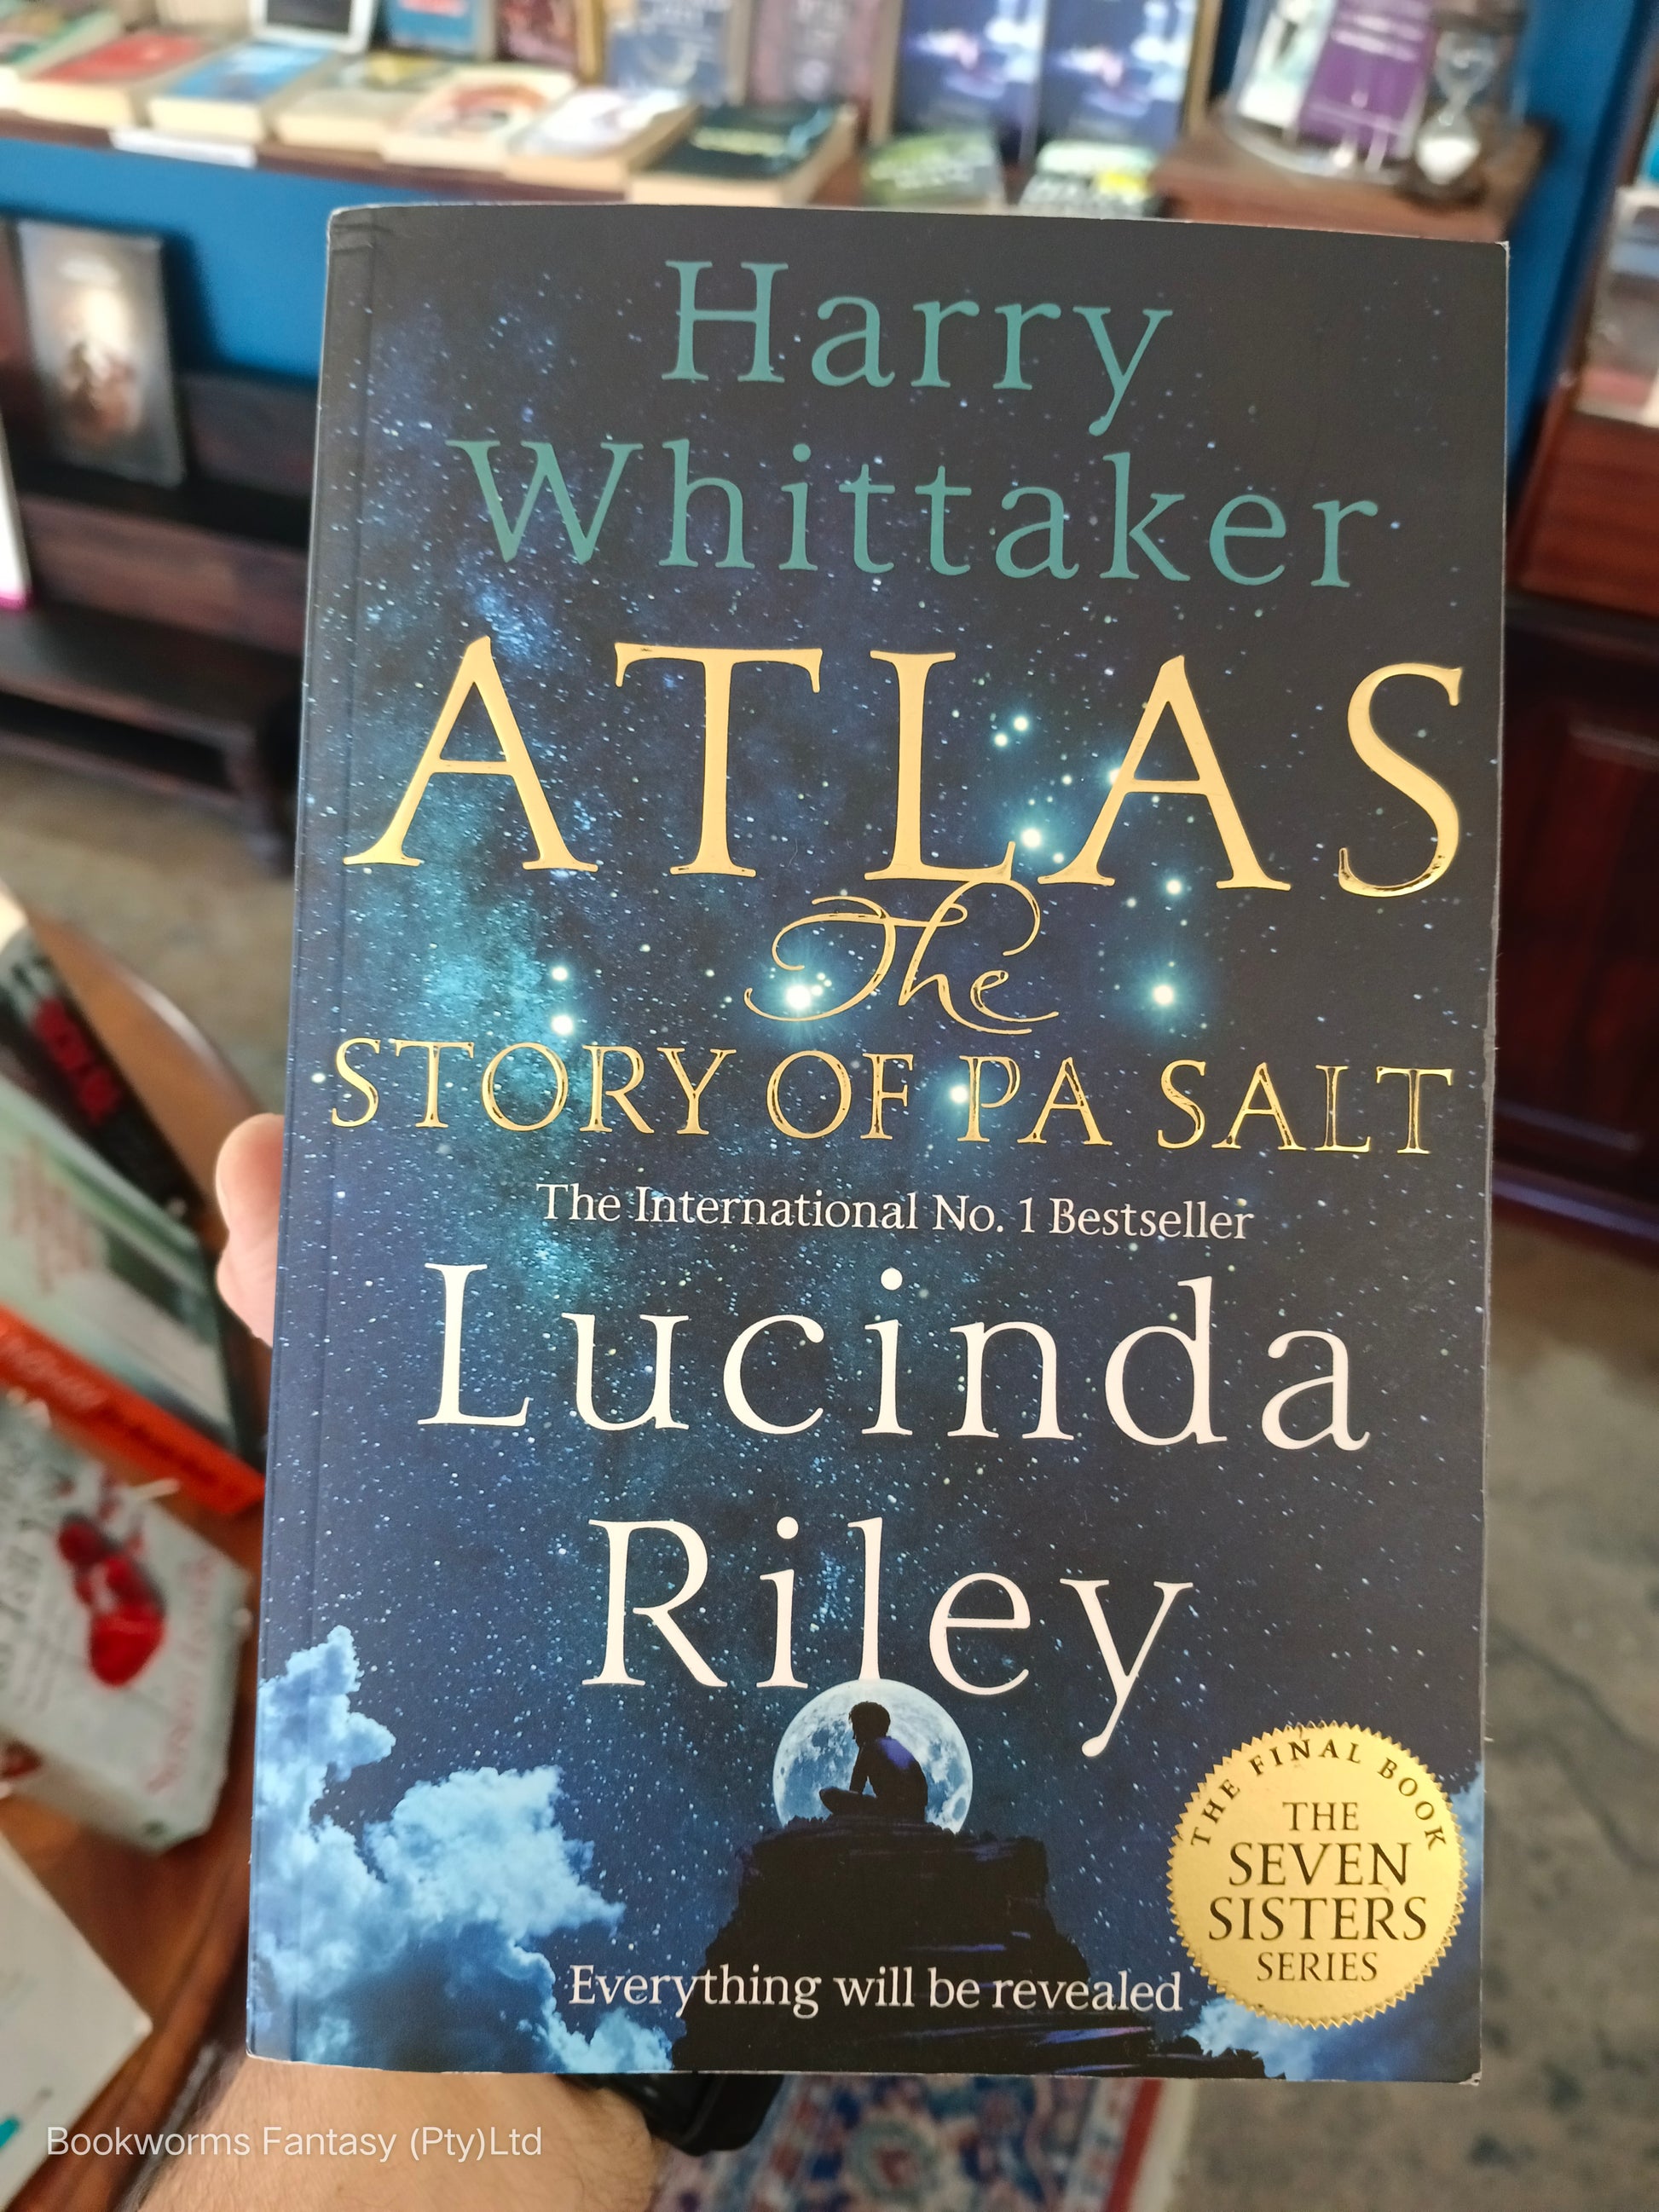 Atlas: The Story of Pa Salt (The Seven Sisters, #8) by Lucinda Riley